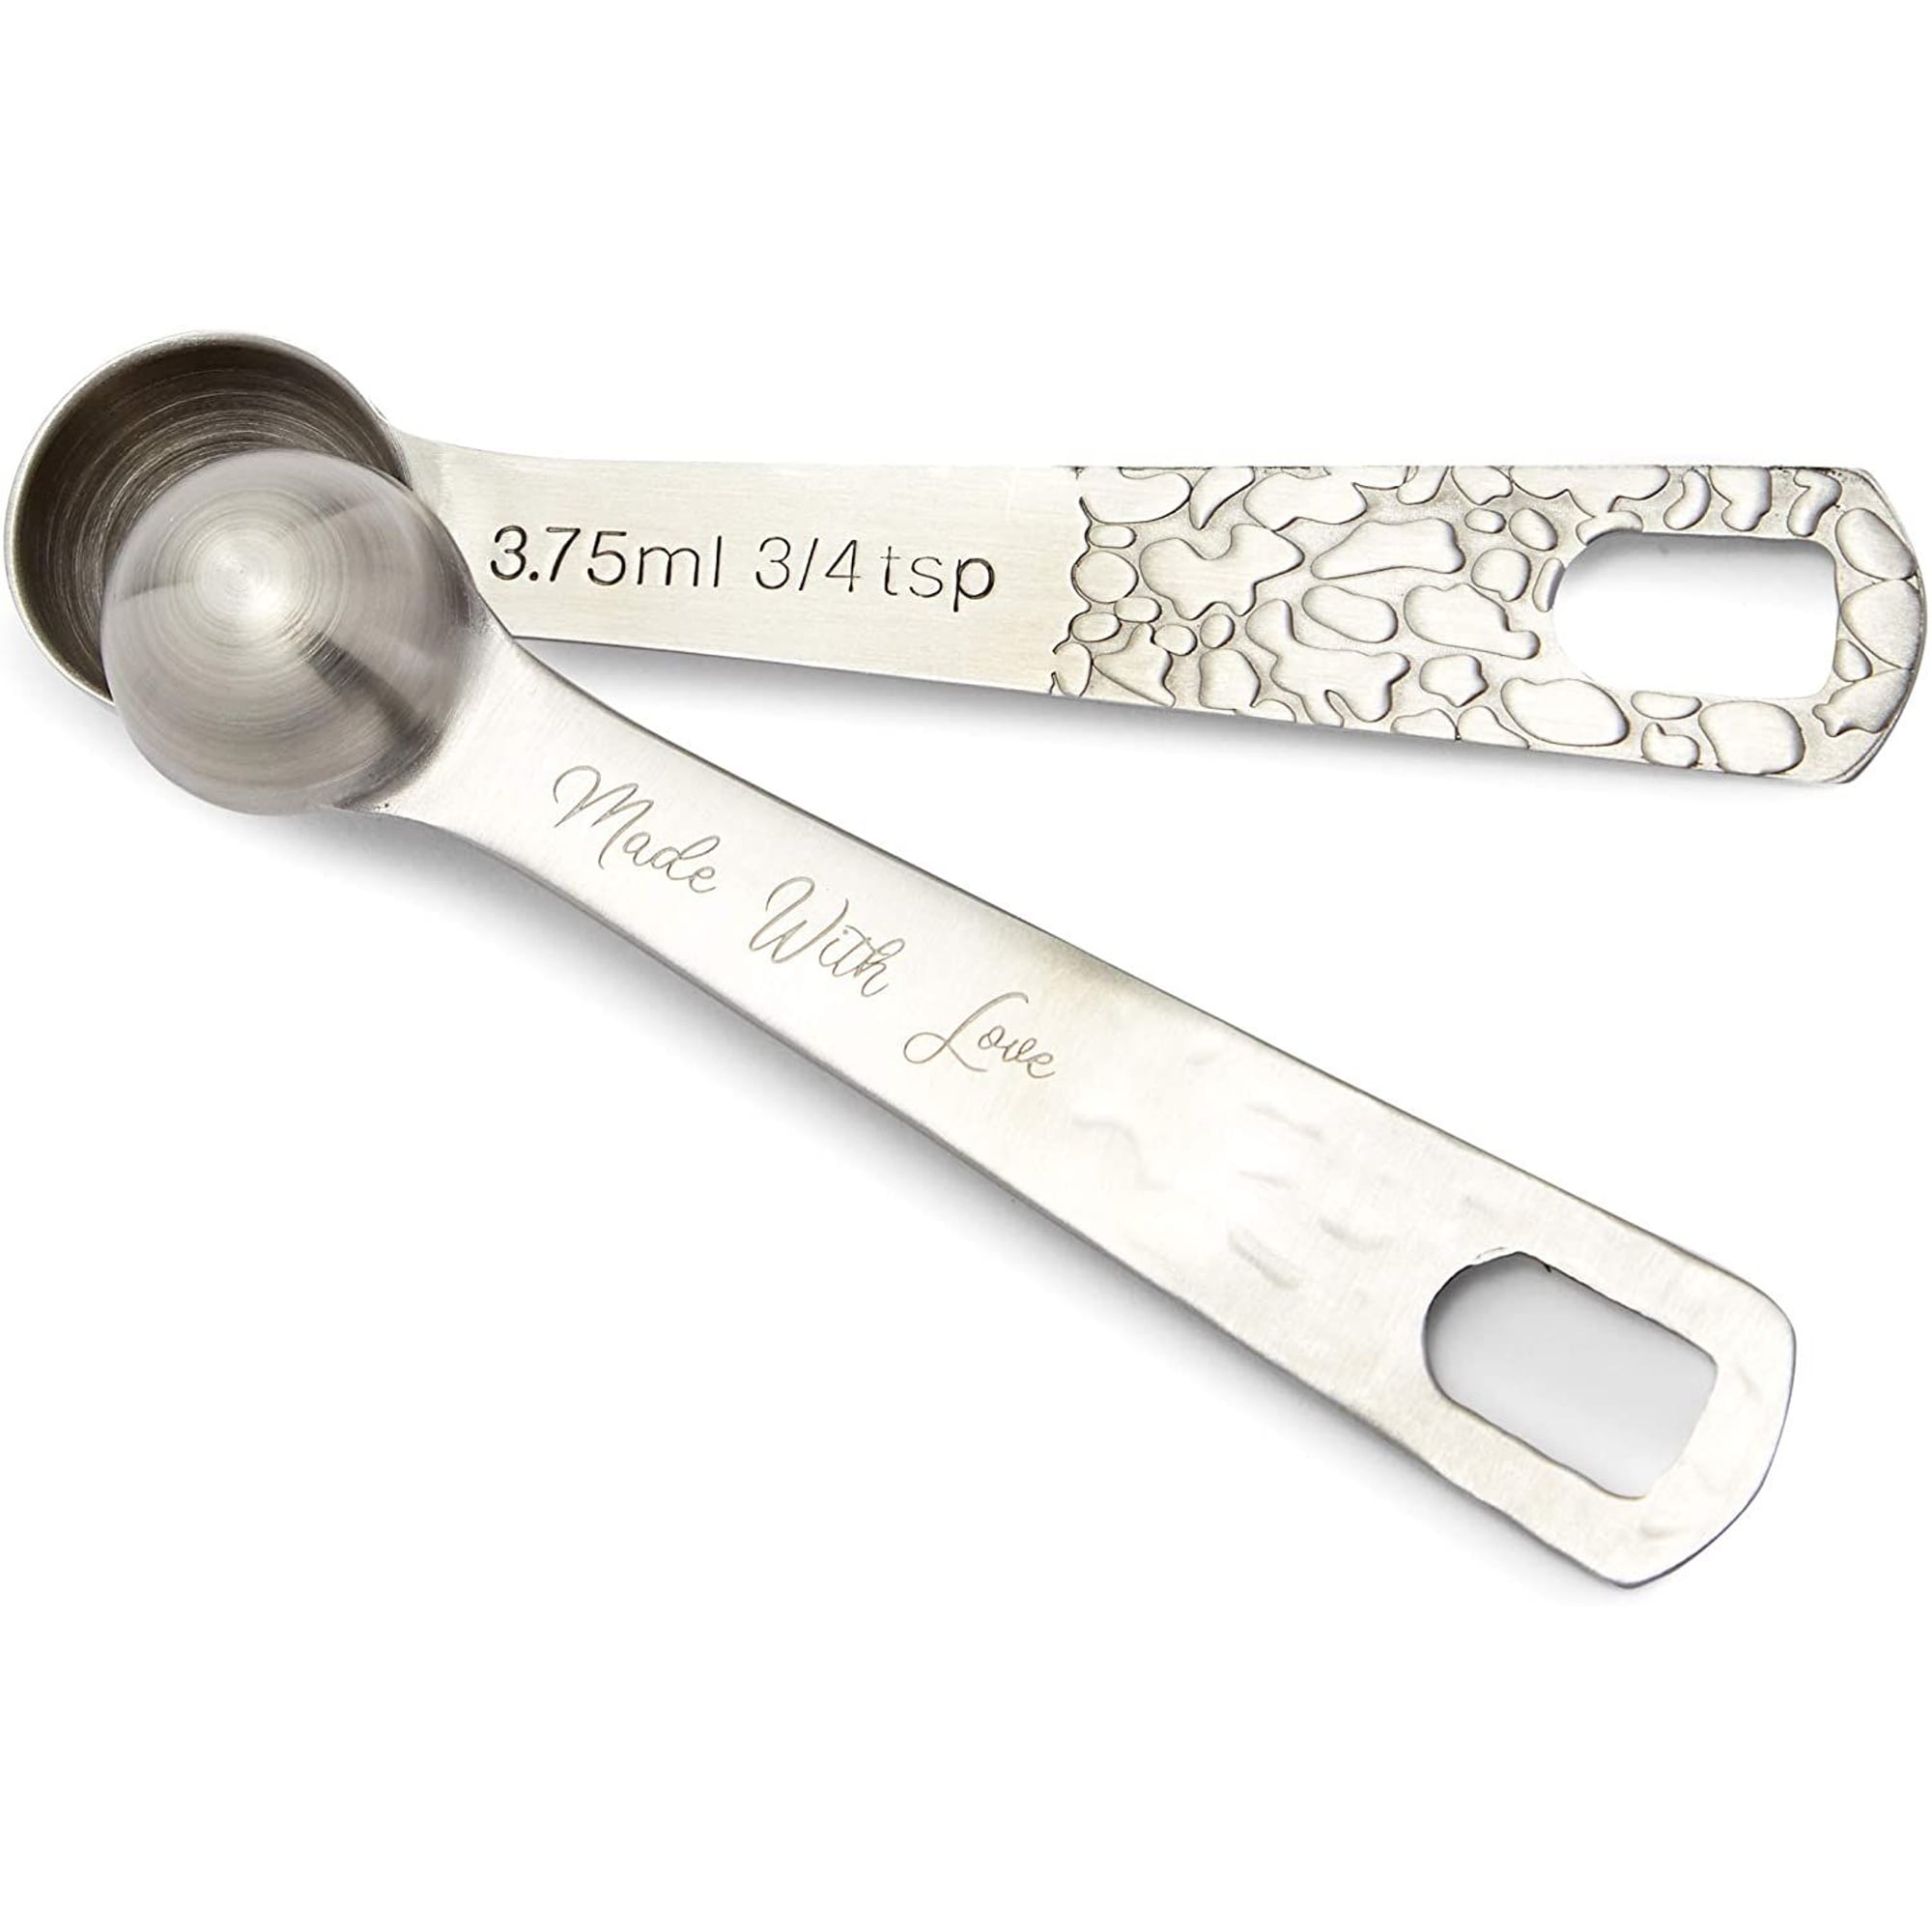 https://ak1.ostkcdn.com/images/products/is/images/direct/a3416d62f2c2737137e387afcac222d74ebed6f6/Stainless-Steel-Measuring-Cup-and-Spoon-Set%2C-US-and-Metric-Measurements-%2811-Sizes%29.jpg